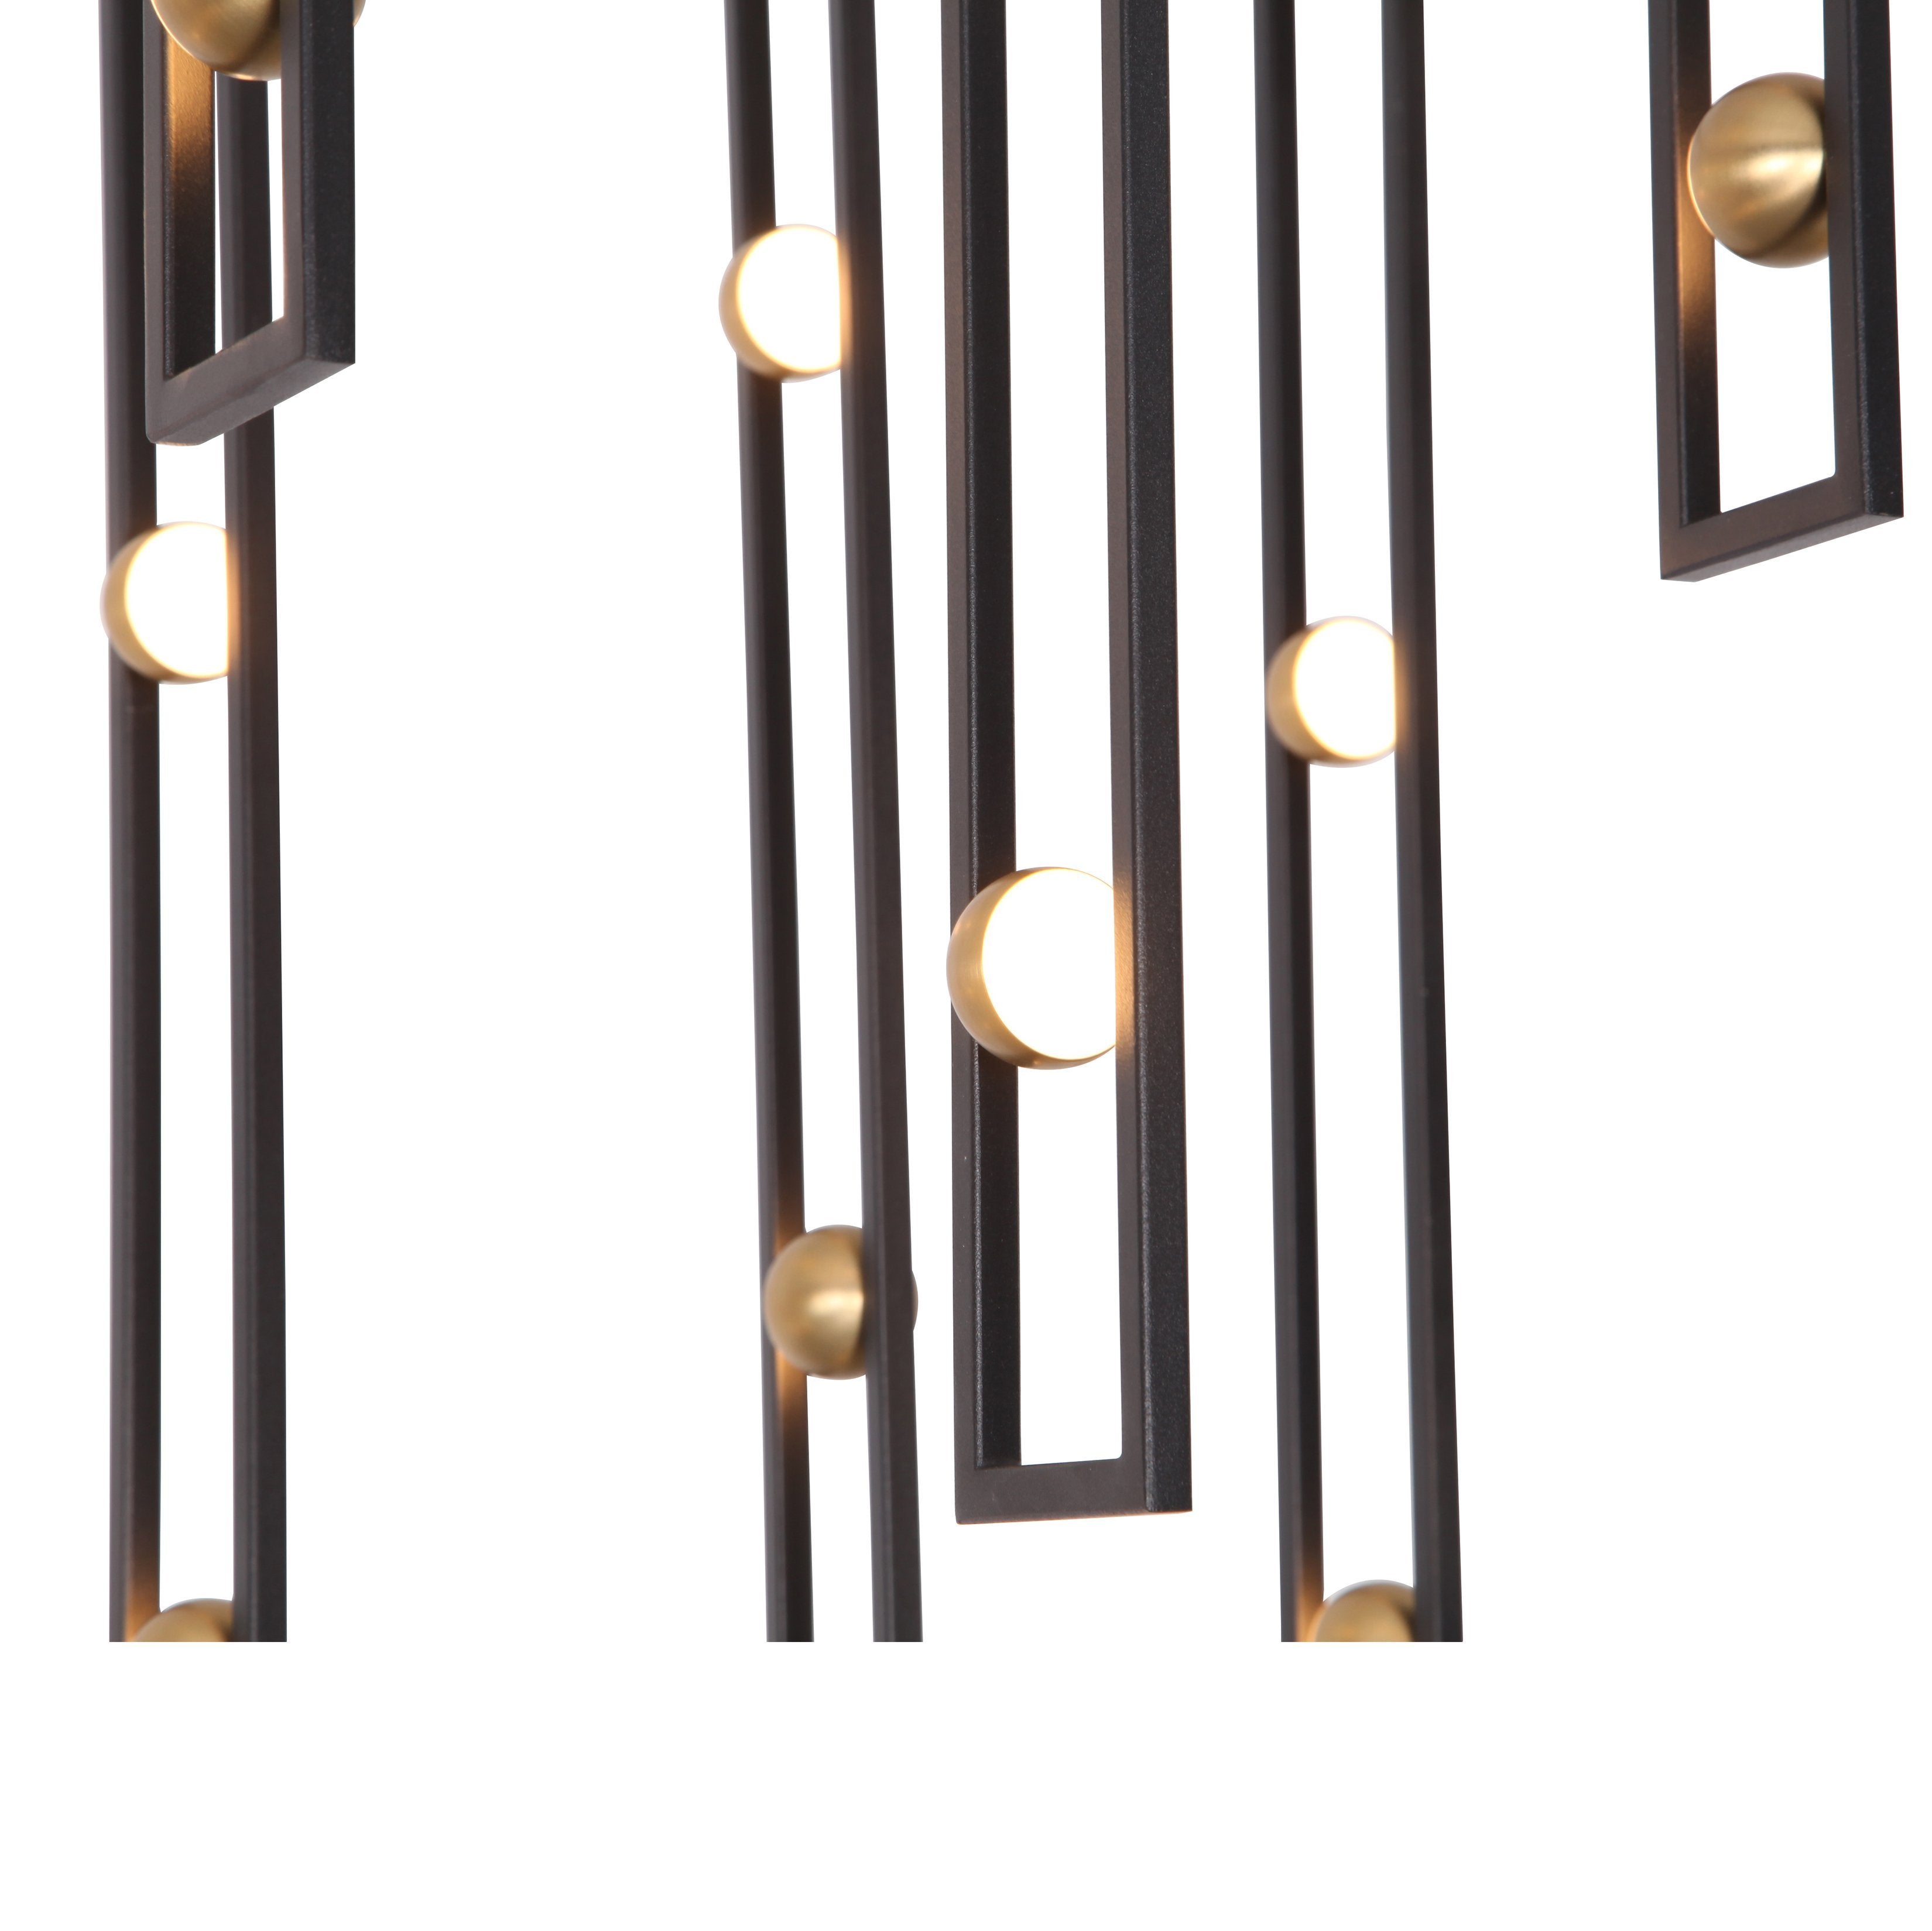 Timothee Bistro 60"W Linear LED Chandelier - Italian Concept